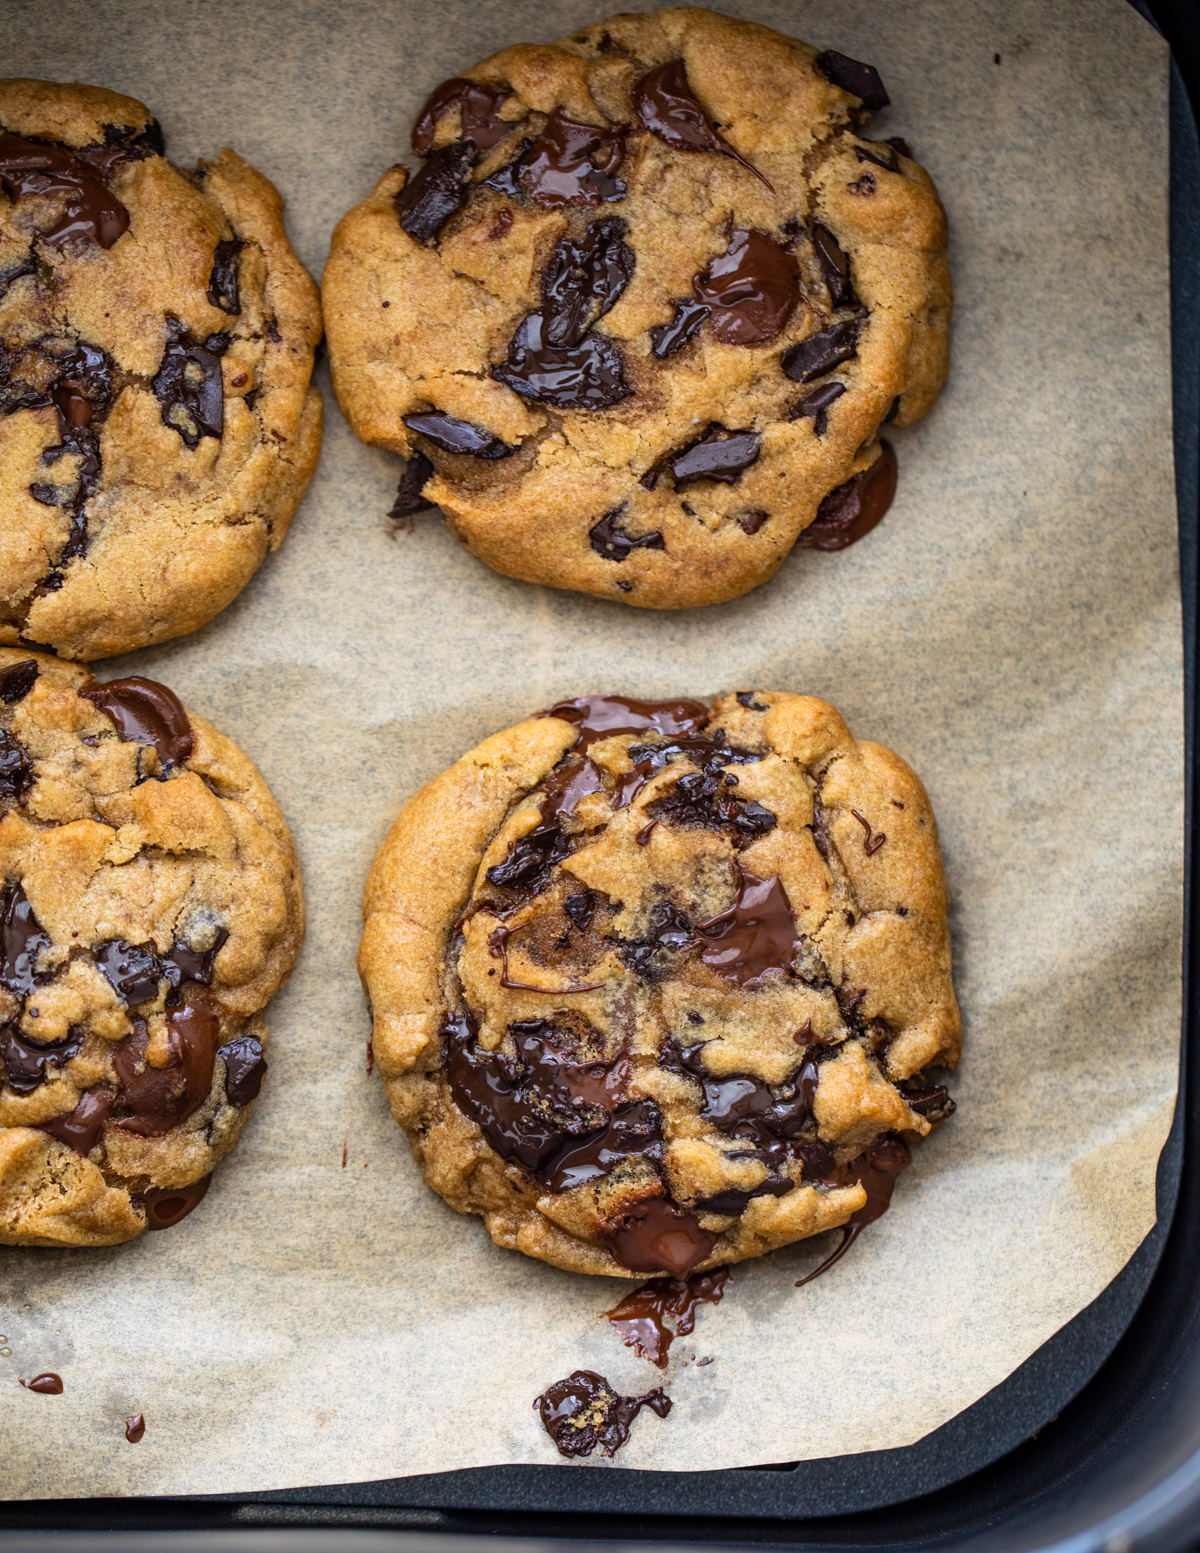 Tips for Making Cookies in an Air Fryer